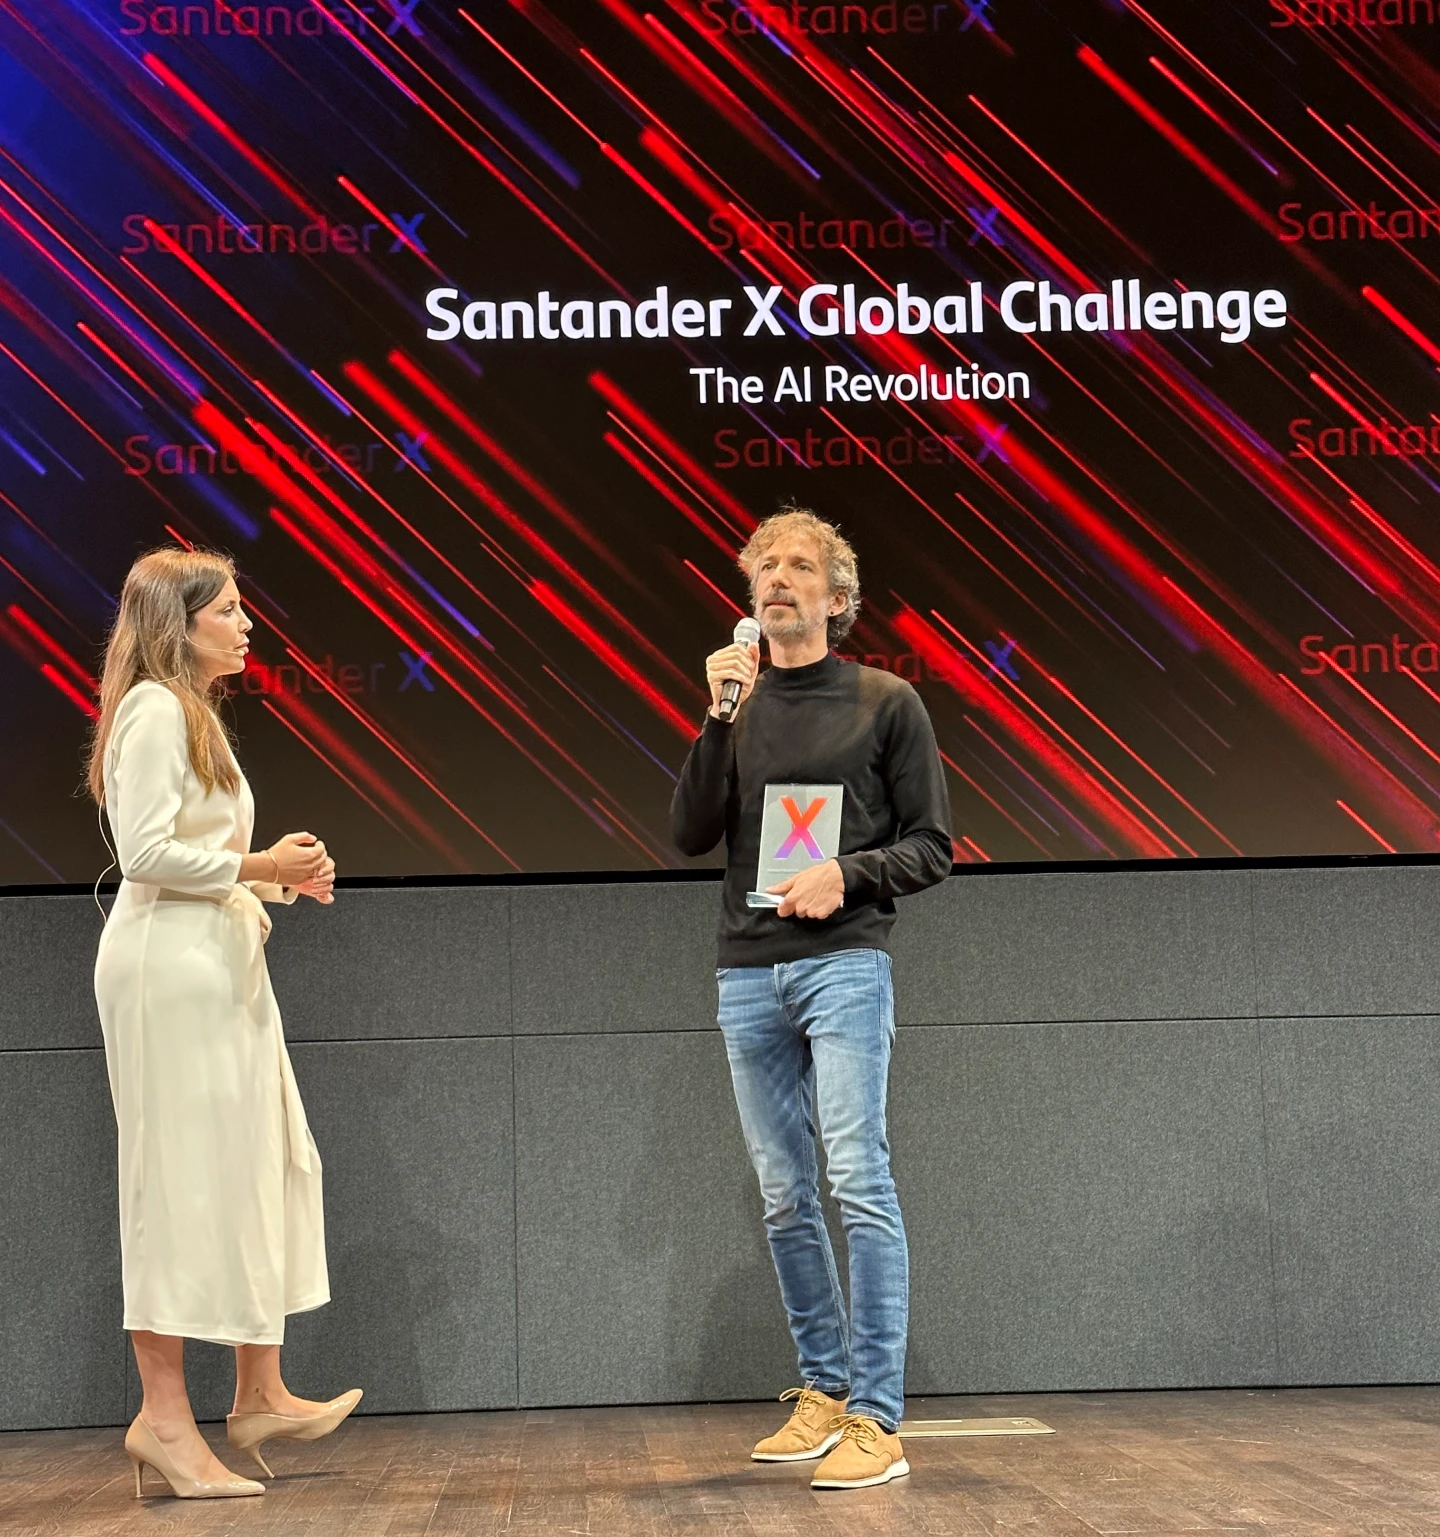 Santander X awards Orquest for its disruptive and innovative solution